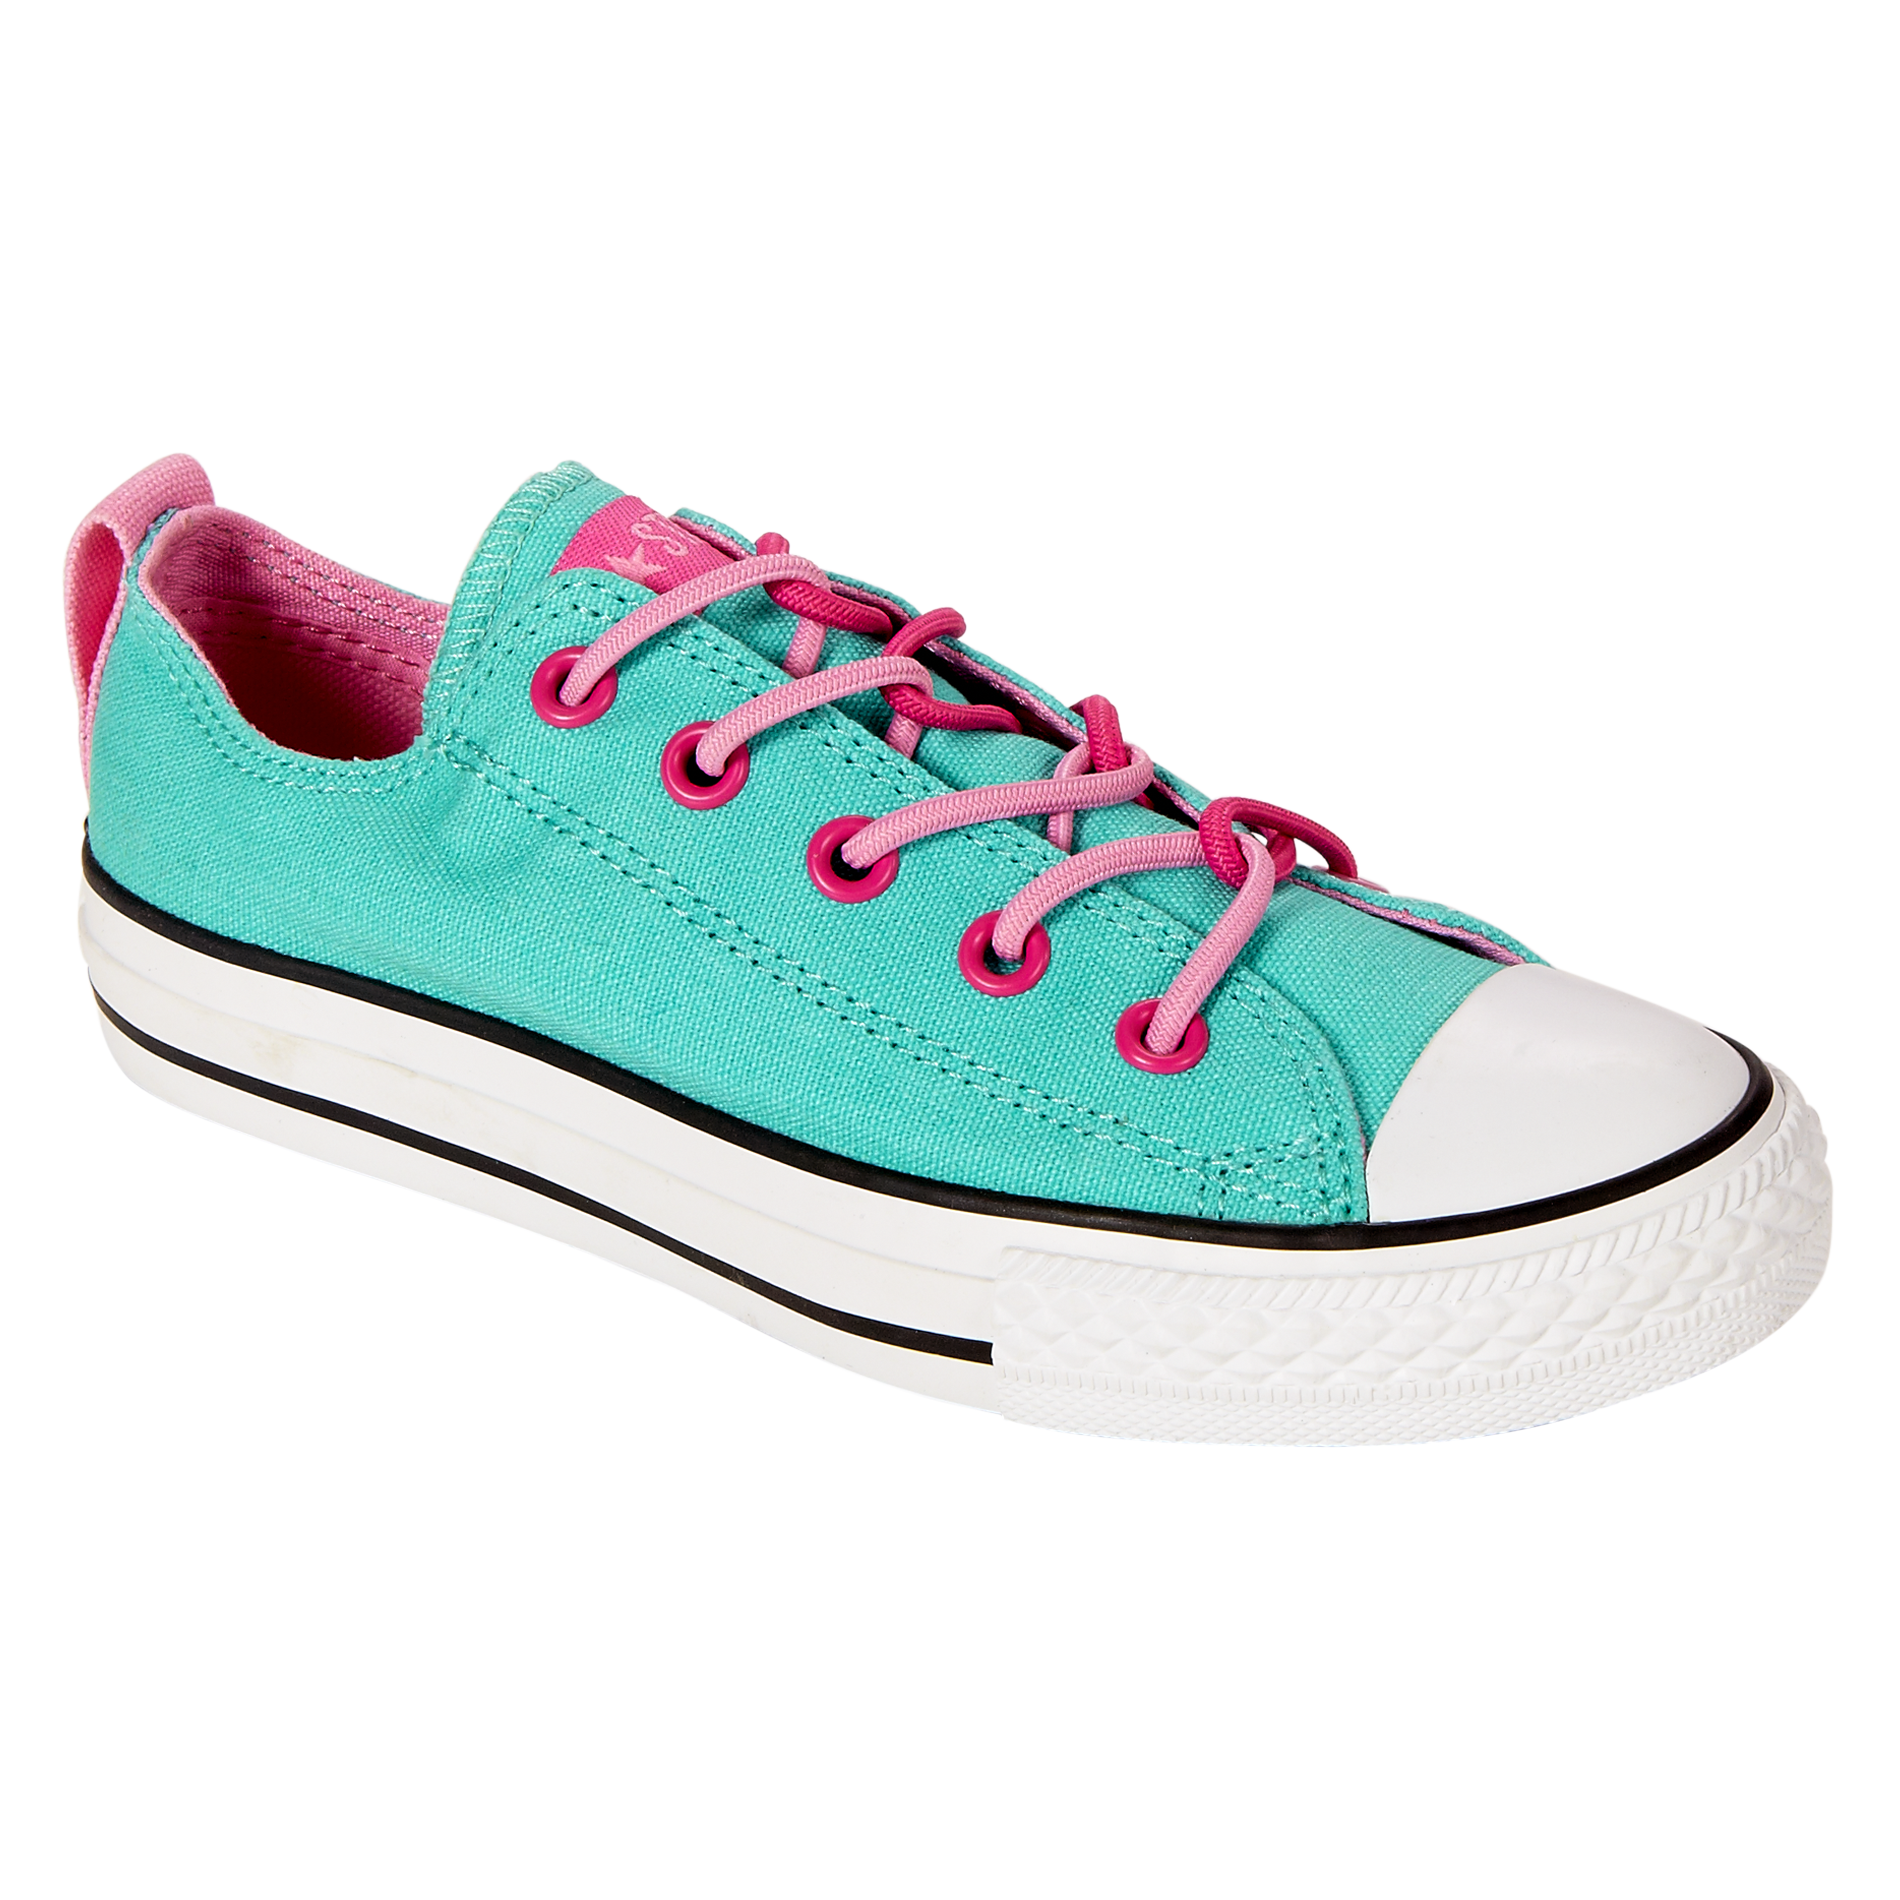 Converse Girl's Chuck Taylor All Star Ox Twisteez Athletic Shoe- Florida Keys 12 - (Toddler/Youth)